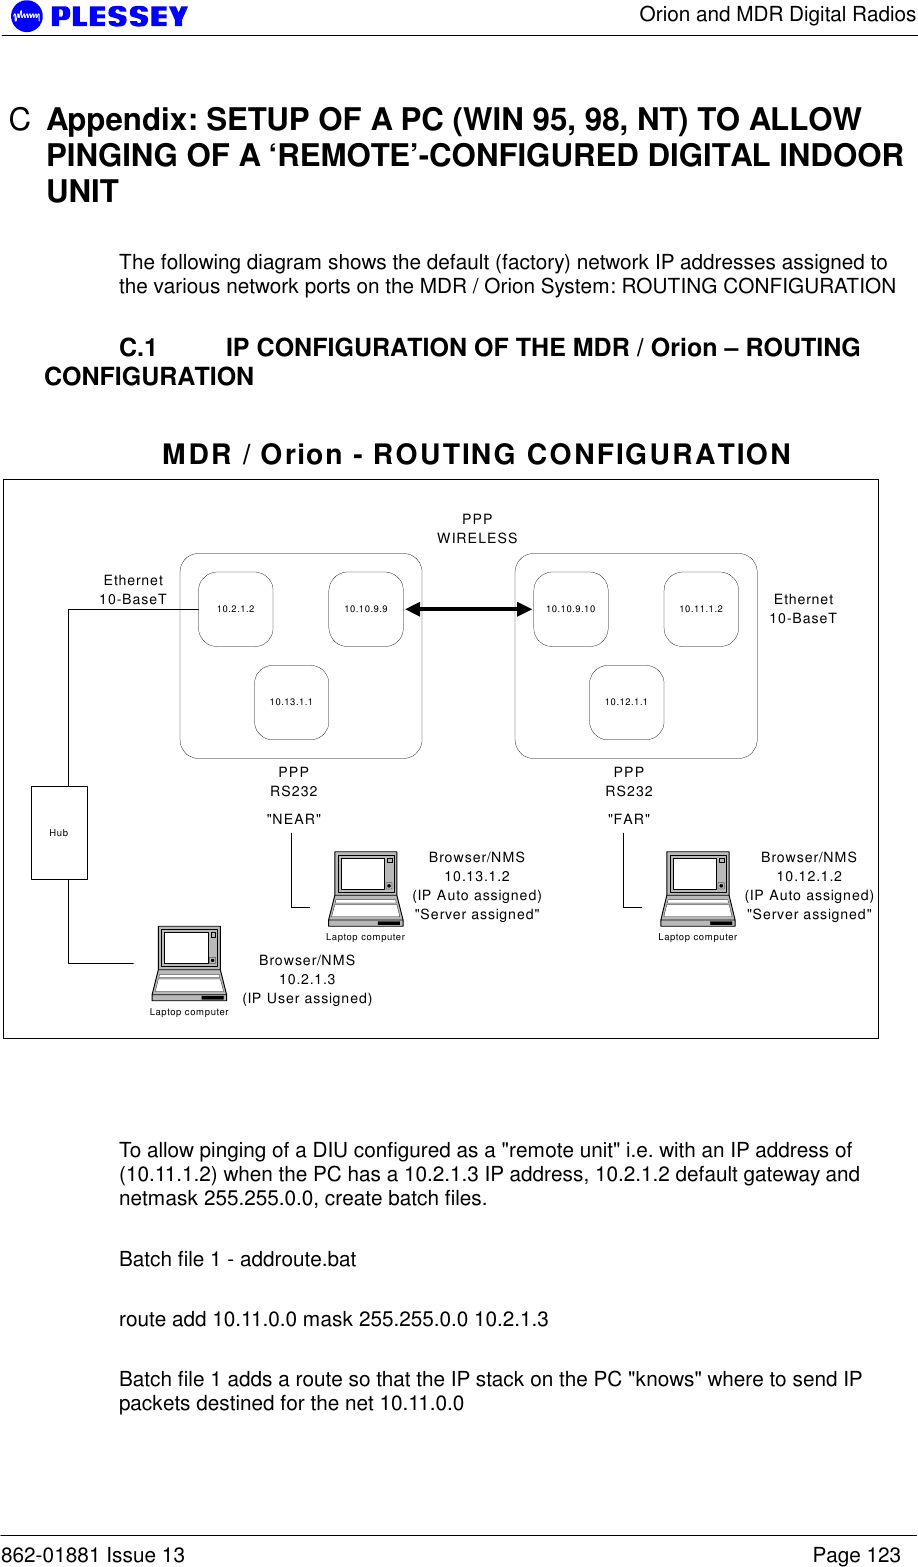      Orion and MDR Digital Radios  862-01881 Issue 13    Page 123 C  Appendix: SETUP OF A PC (WIN 95, 98, NT) TO ALLOW PINGING OF A ‘REMOTE’-CONFIGURED DIGITAL INDOOR UNIT  The following diagram shows the default (factory) network IP addresses assigned to the various network ports on the MDR / Orion System: ROUTING CONFIGURATION    C.1  IP CONFIGURATION OF THE MDR / Orion – ROUTING CONFIGURATION  10.2.1.2 10.10.9.910.13.1.110.10.9.10 10.11.1.210.12.1.1Ethernet10-BaseTPPPRS232PPPWIRELESSPPPRS232Ethernet10-BaseT&quot;NEAR&quot; &quot;FAR&quot;Laptop computerBrowser/NMS10.2.1.3(IP User assigned)HubMDR / Orion - ROUTING CONFIGURATIONLaptop computerBrowser/NMS10.12.1.2(IP Auto assigned)&quot;Server assigned&quot;Laptop computerBrowser/NMS10.13.1.2(IP Auto assigned)&quot;Server assigned&quot;    To allow pinging of a DIU configured as a &quot;remote unit&quot; i.e. with an IP address of (10.11.1.2) when the PC has a 10.2.1.3 IP address, 10.2.1.2 default gateway and netmask 255.255.0.0, create batch files.    Batch file 1 - addroute.bat  route add 10.11.0.0 mask 255.255.0.0 10.2.1.3  Batch file 1 adds a route so that the IP stack on the PC &quot;knows&quot; where to send IP packets destined for the net 10.11.0.0   